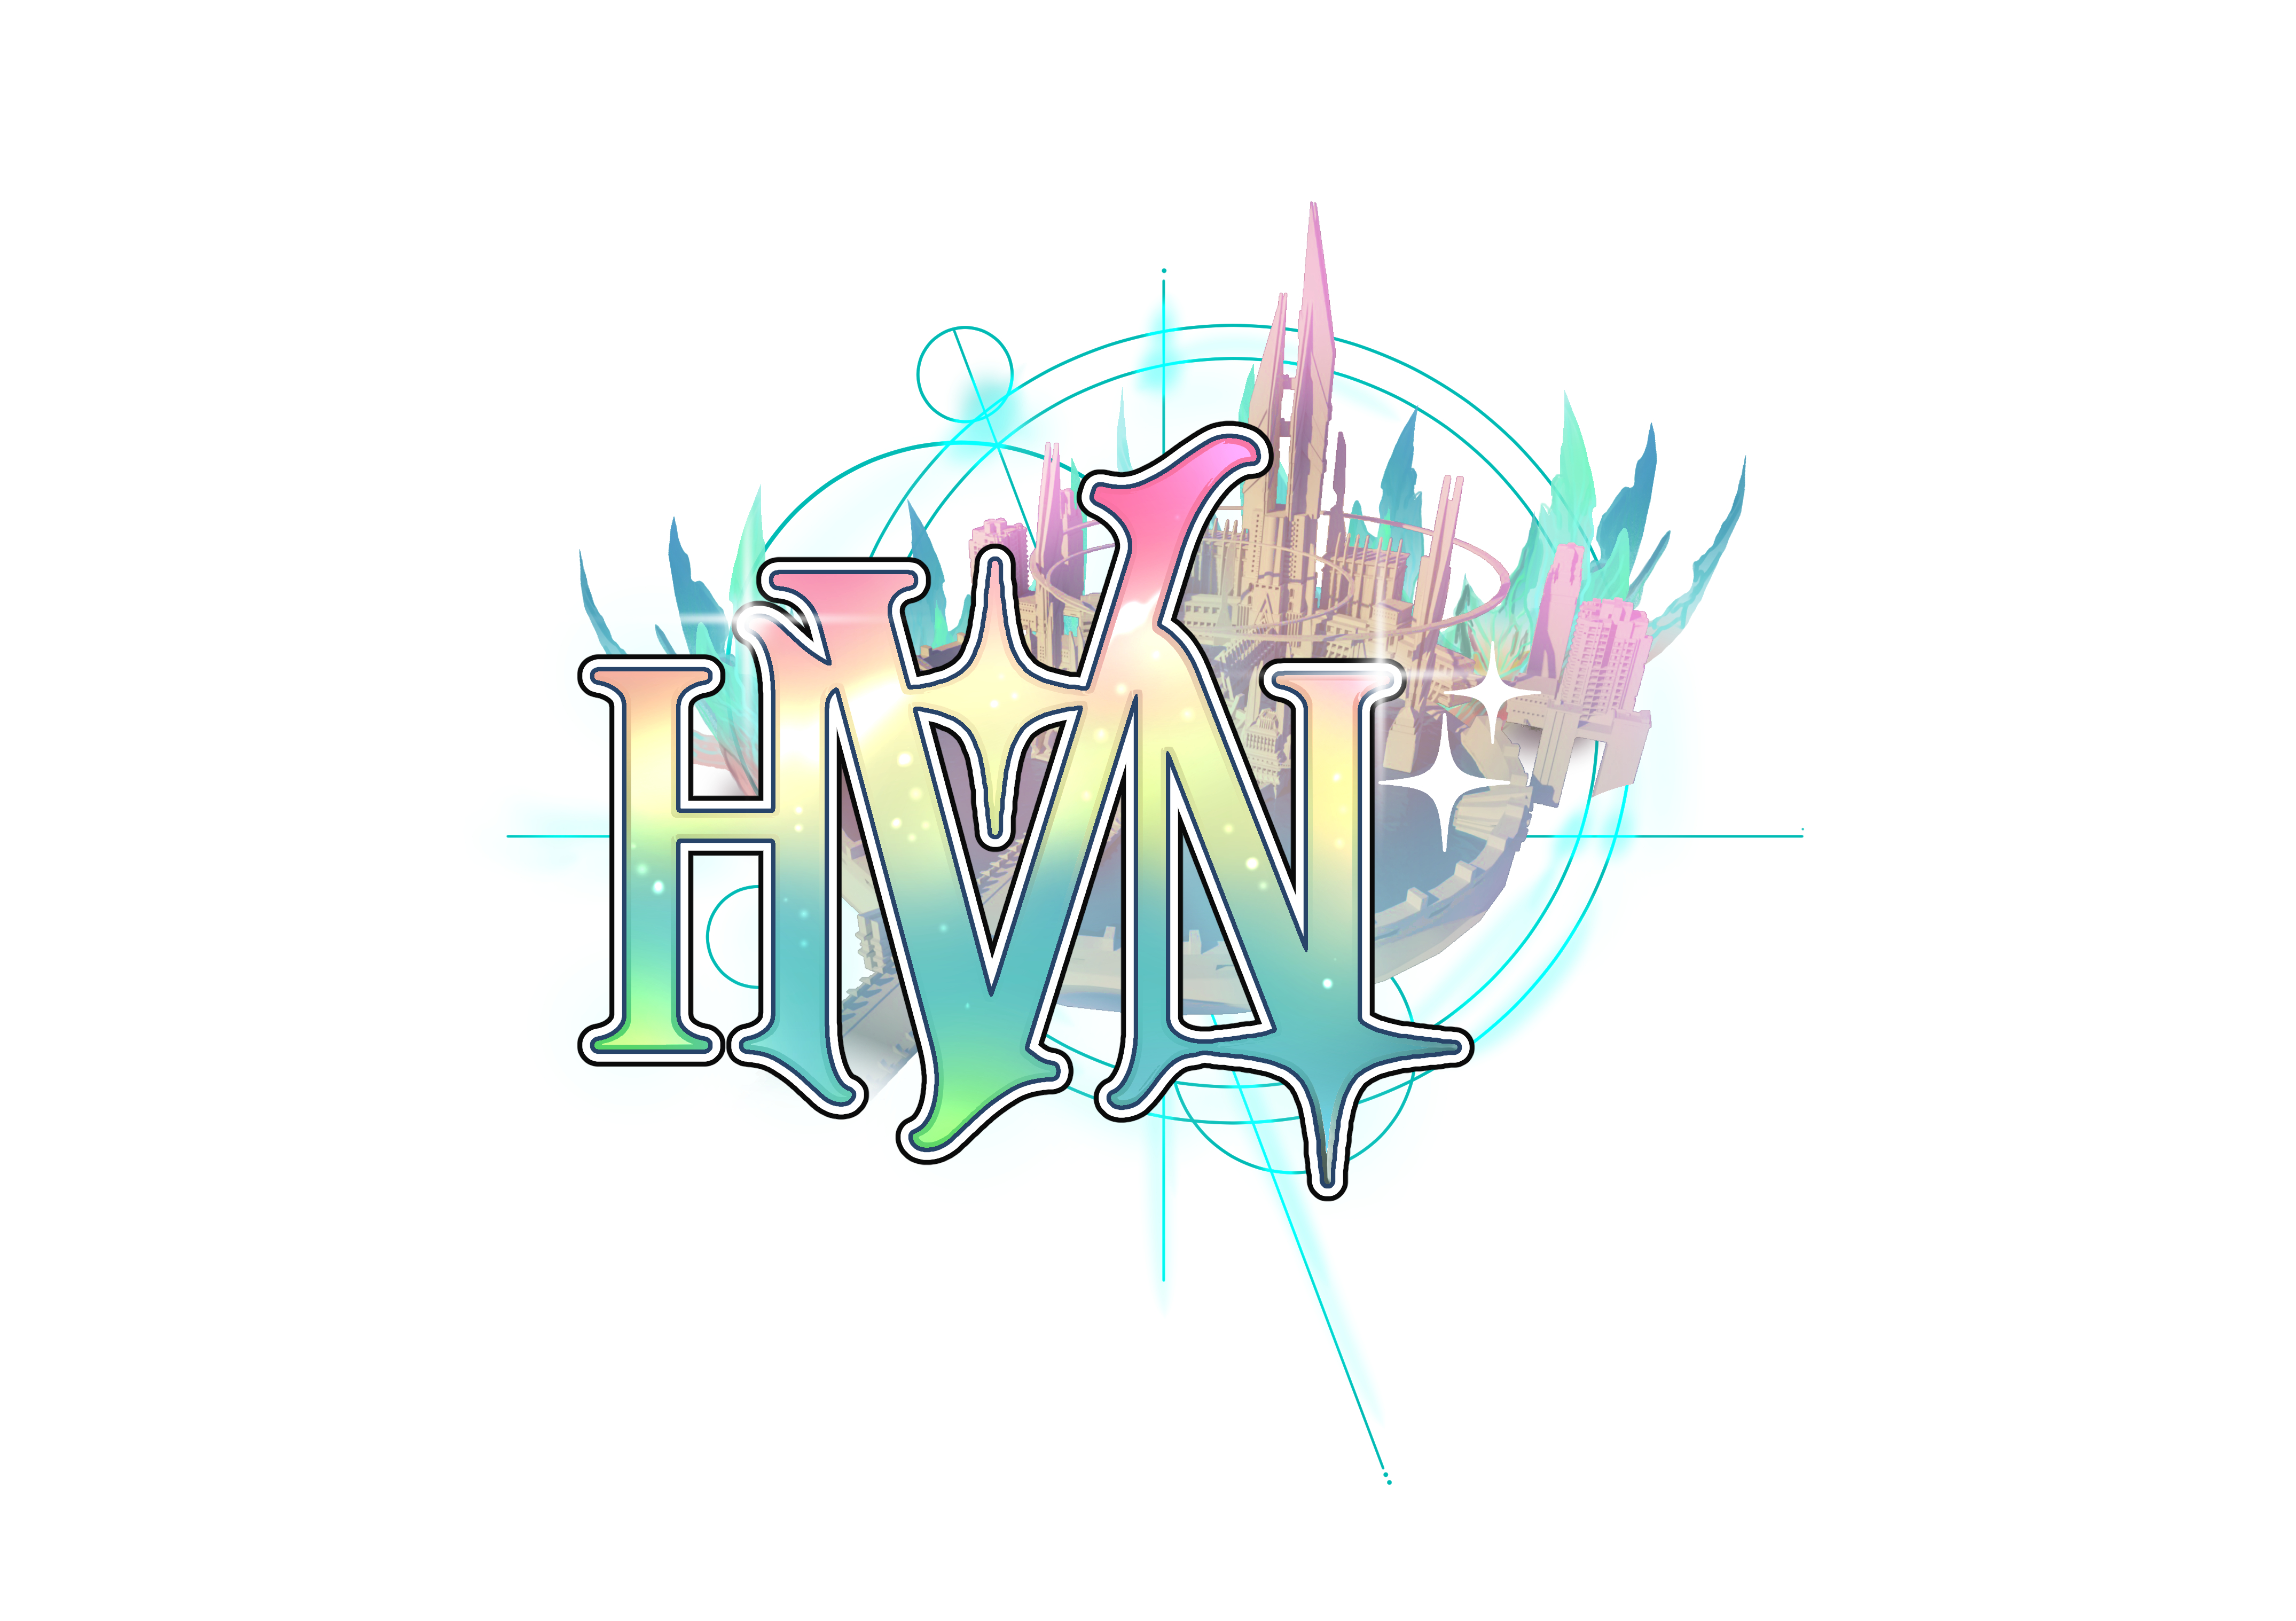 Project HVN